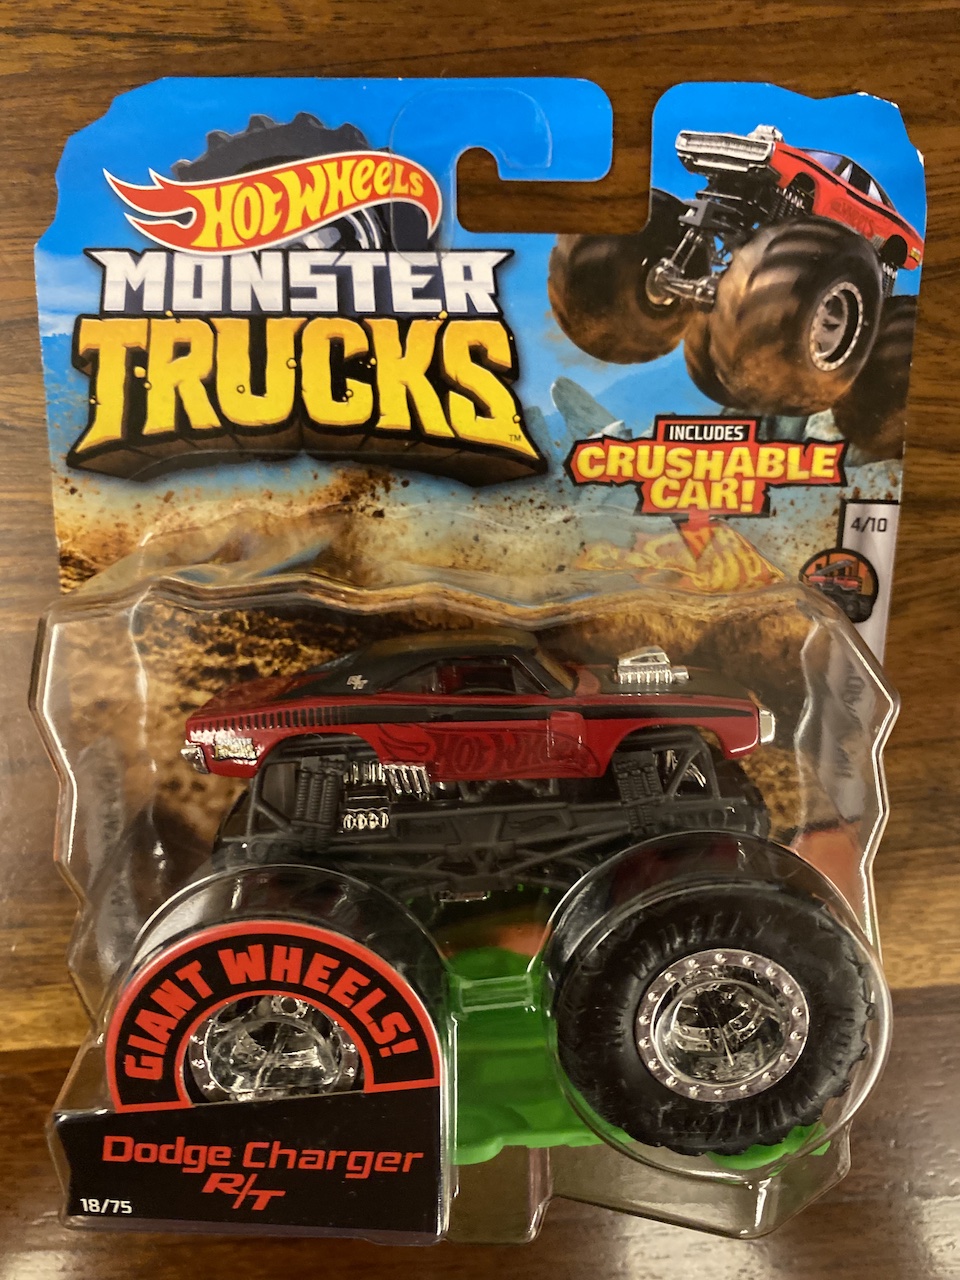 Hot Wheels Monster Trucks Bone Shaker die-cast 1:24 Scale Vehicle with  Giant Wheels for Kids Age 3 to 8 Years Old Great Gift Toy Trucks Large  Scales